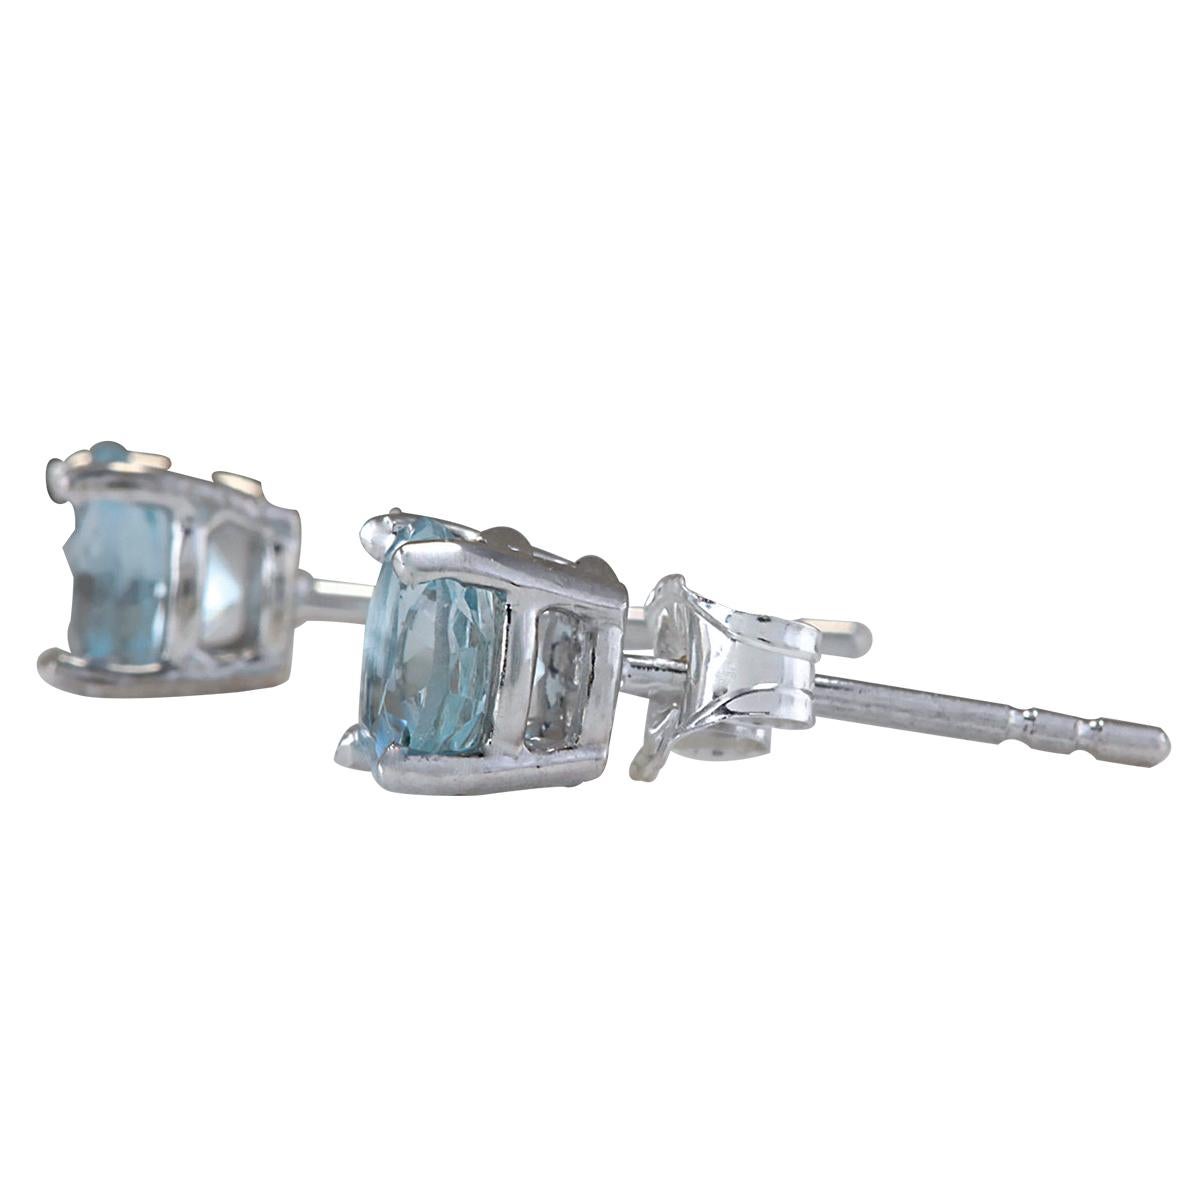 Stamped: 14K White Gold
Total Earrings Weight: 0.9 Grams
Total Natural Aquamarine Weight is 1.18 Carat (Measures: 5.00x5.00 mm)
Color: Blue
Face Measures: 5.00x5.00 mm
Sku: [702388W]